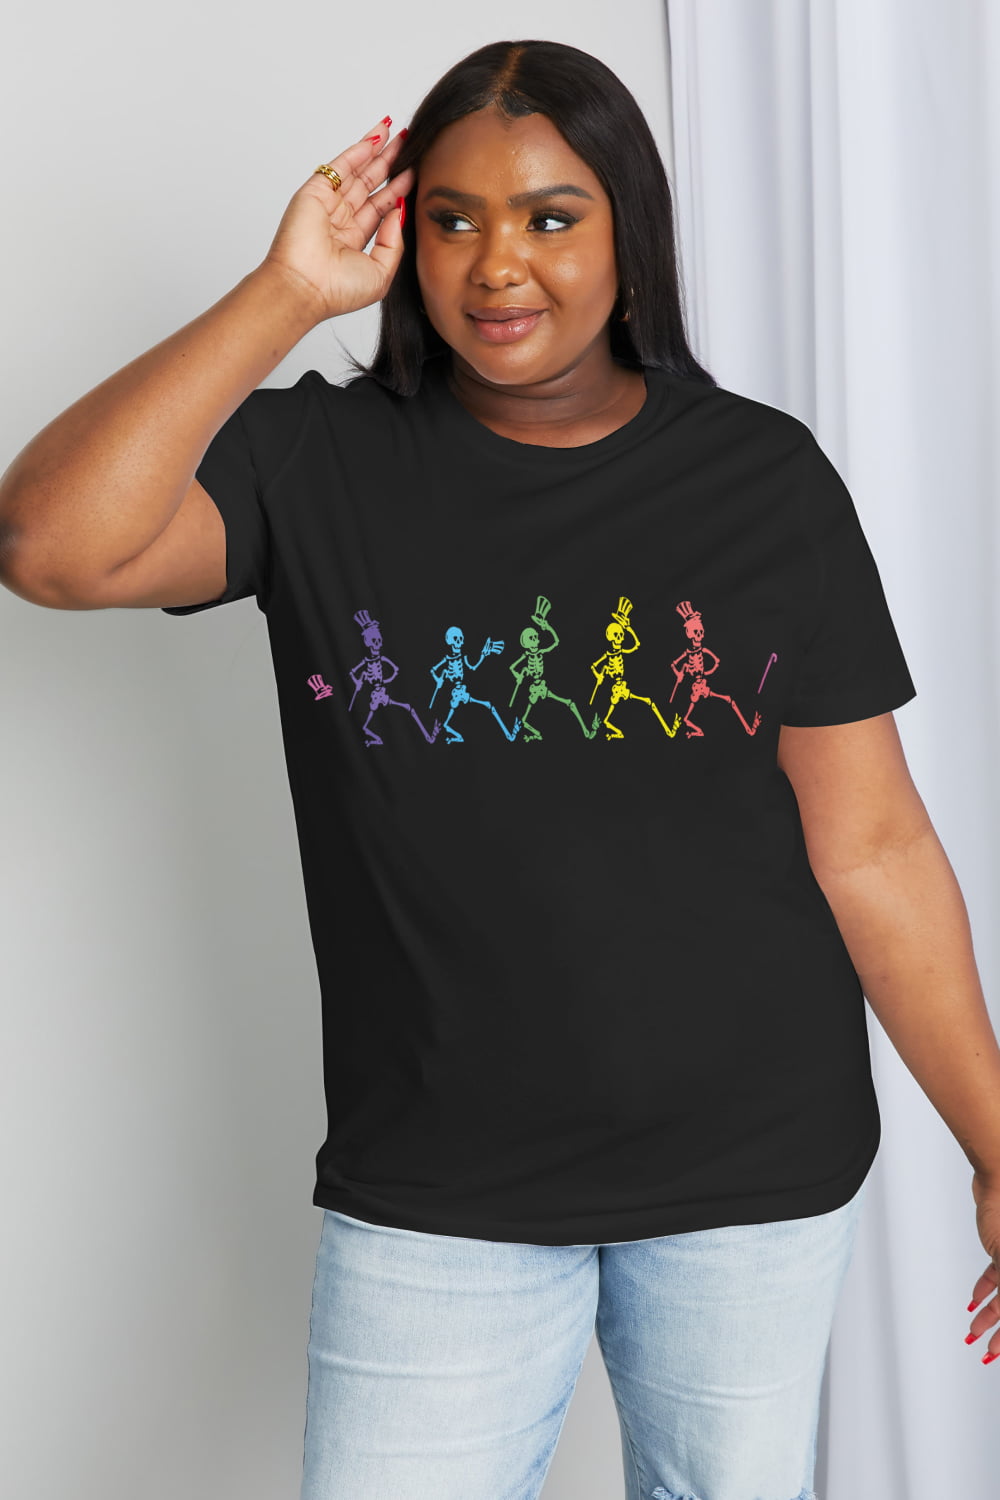 Full Size Dancing Skeleton Graphic Cotton Tee - Black / S - T-Shirts - Shirts & Tops - 1 - 2024